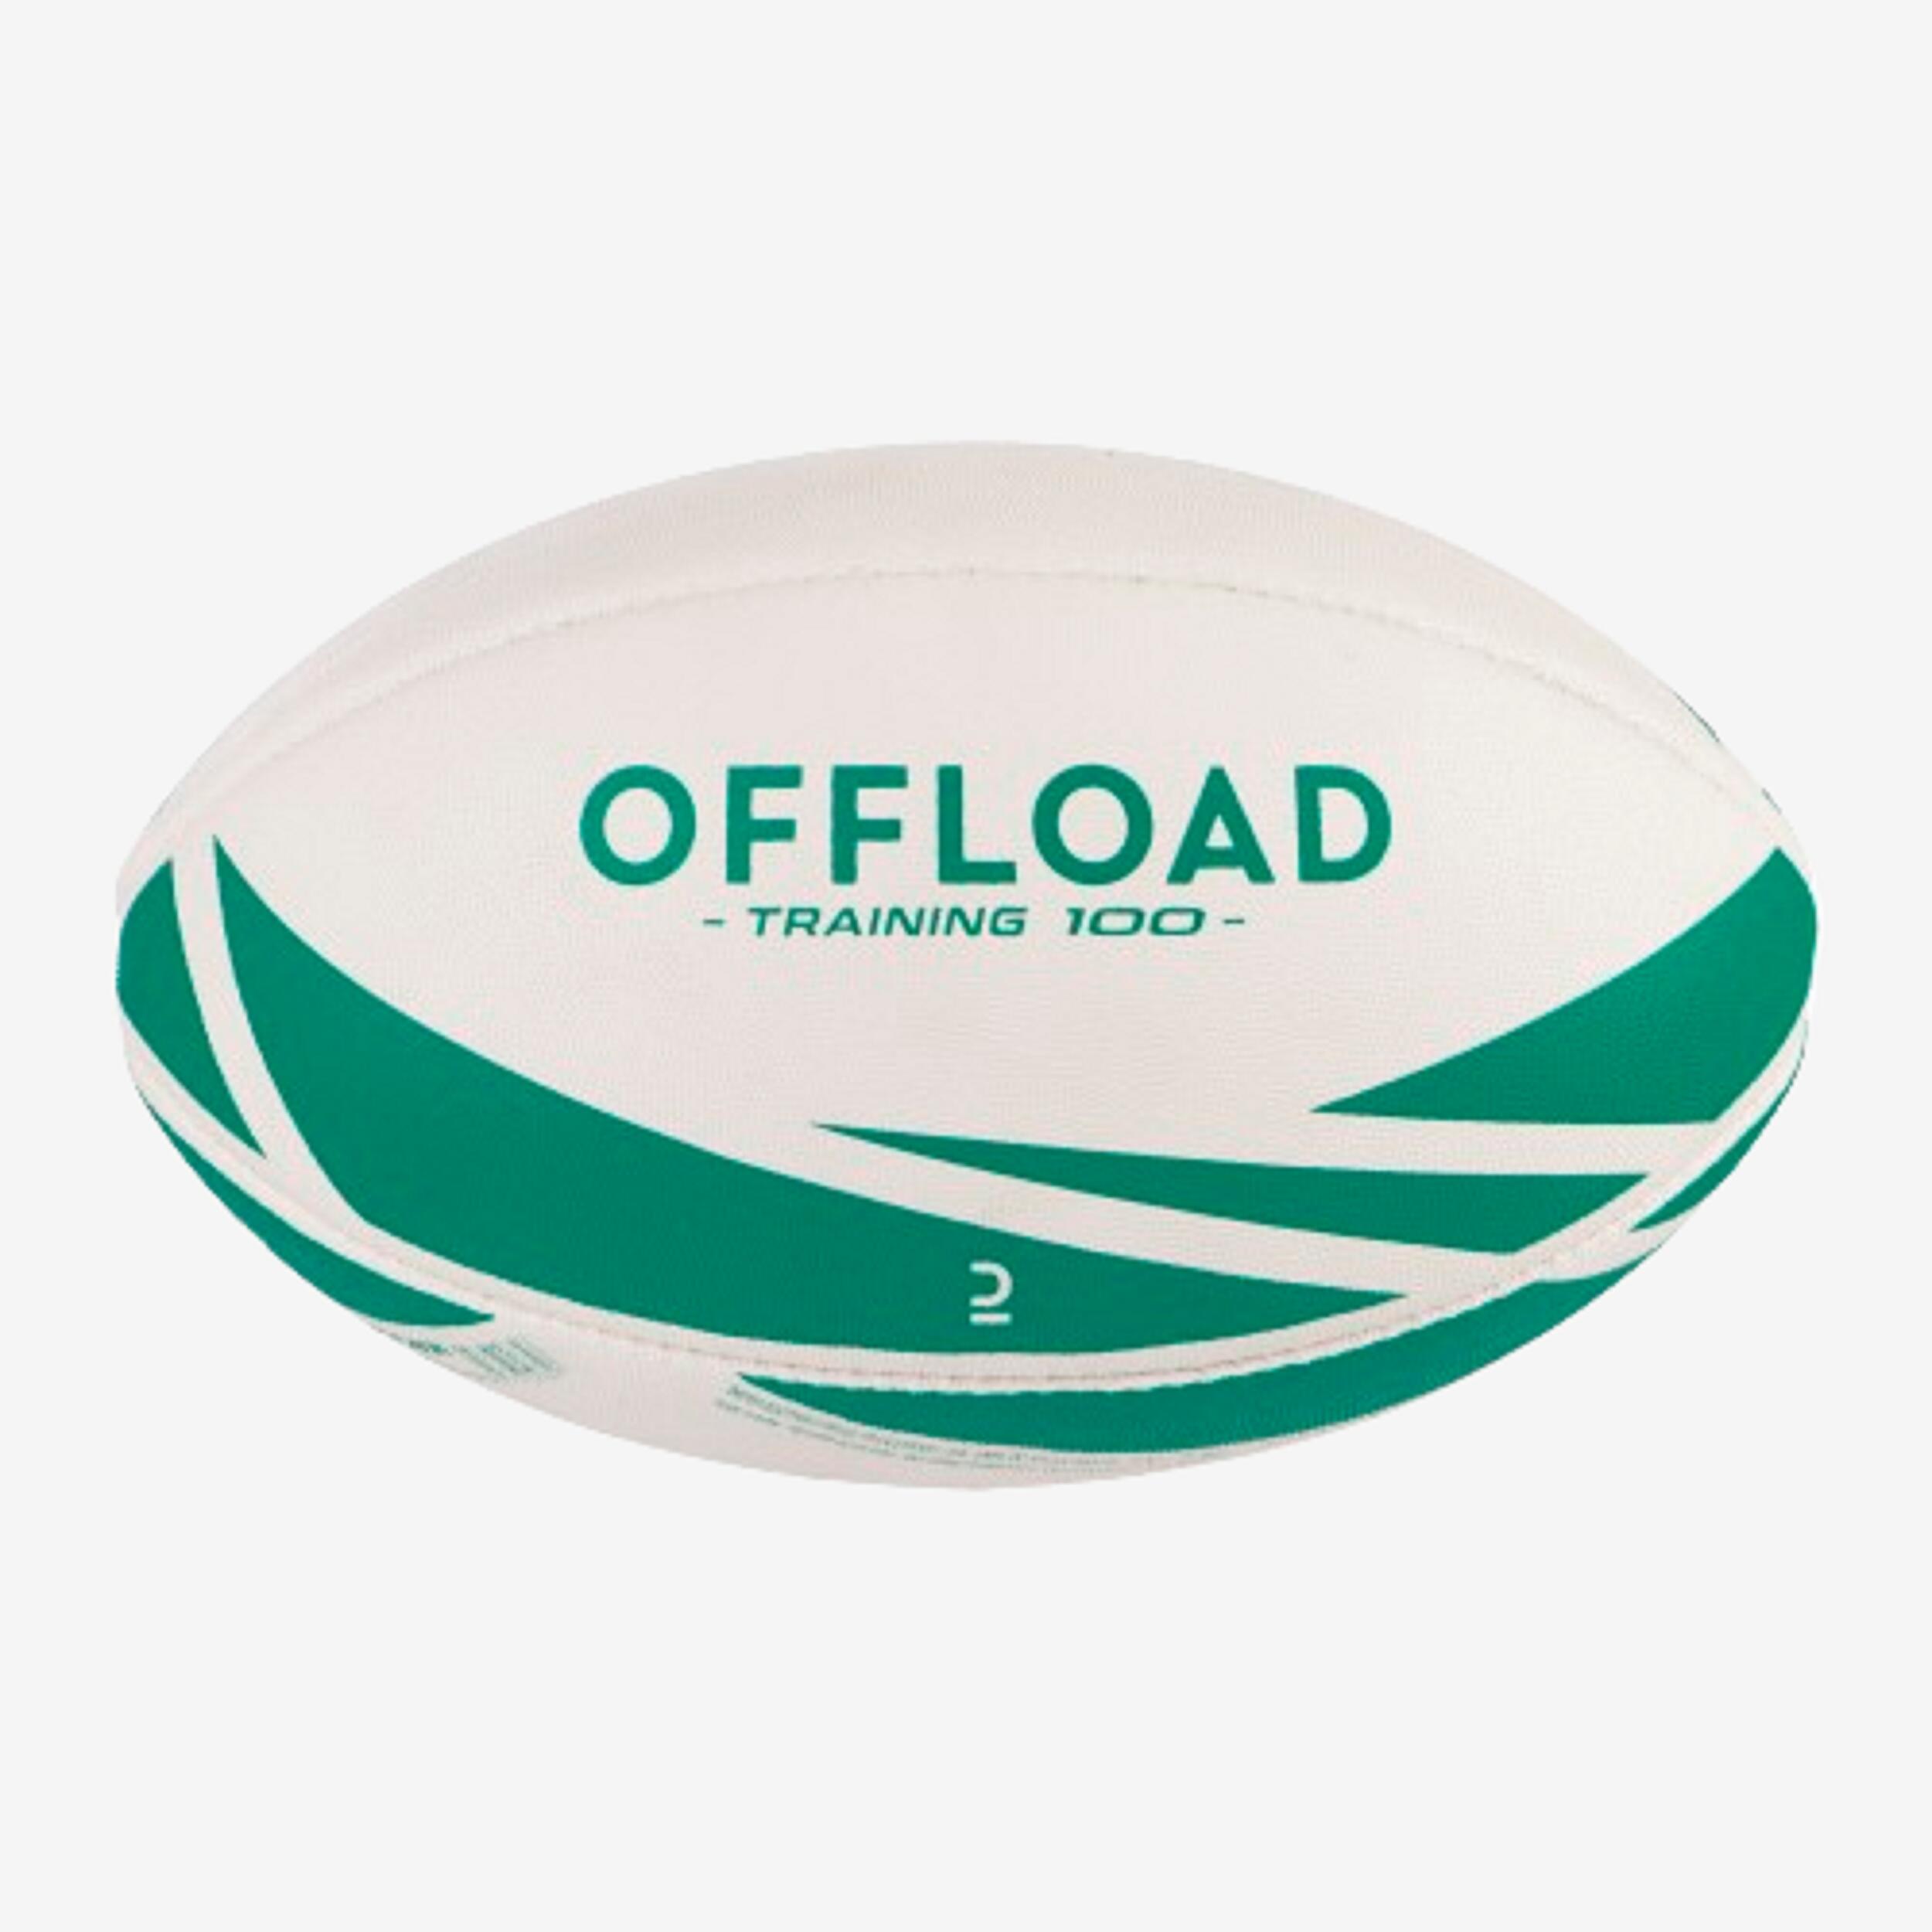 OFFLOAD Size 3 Rugby Training Ball R100 - Green